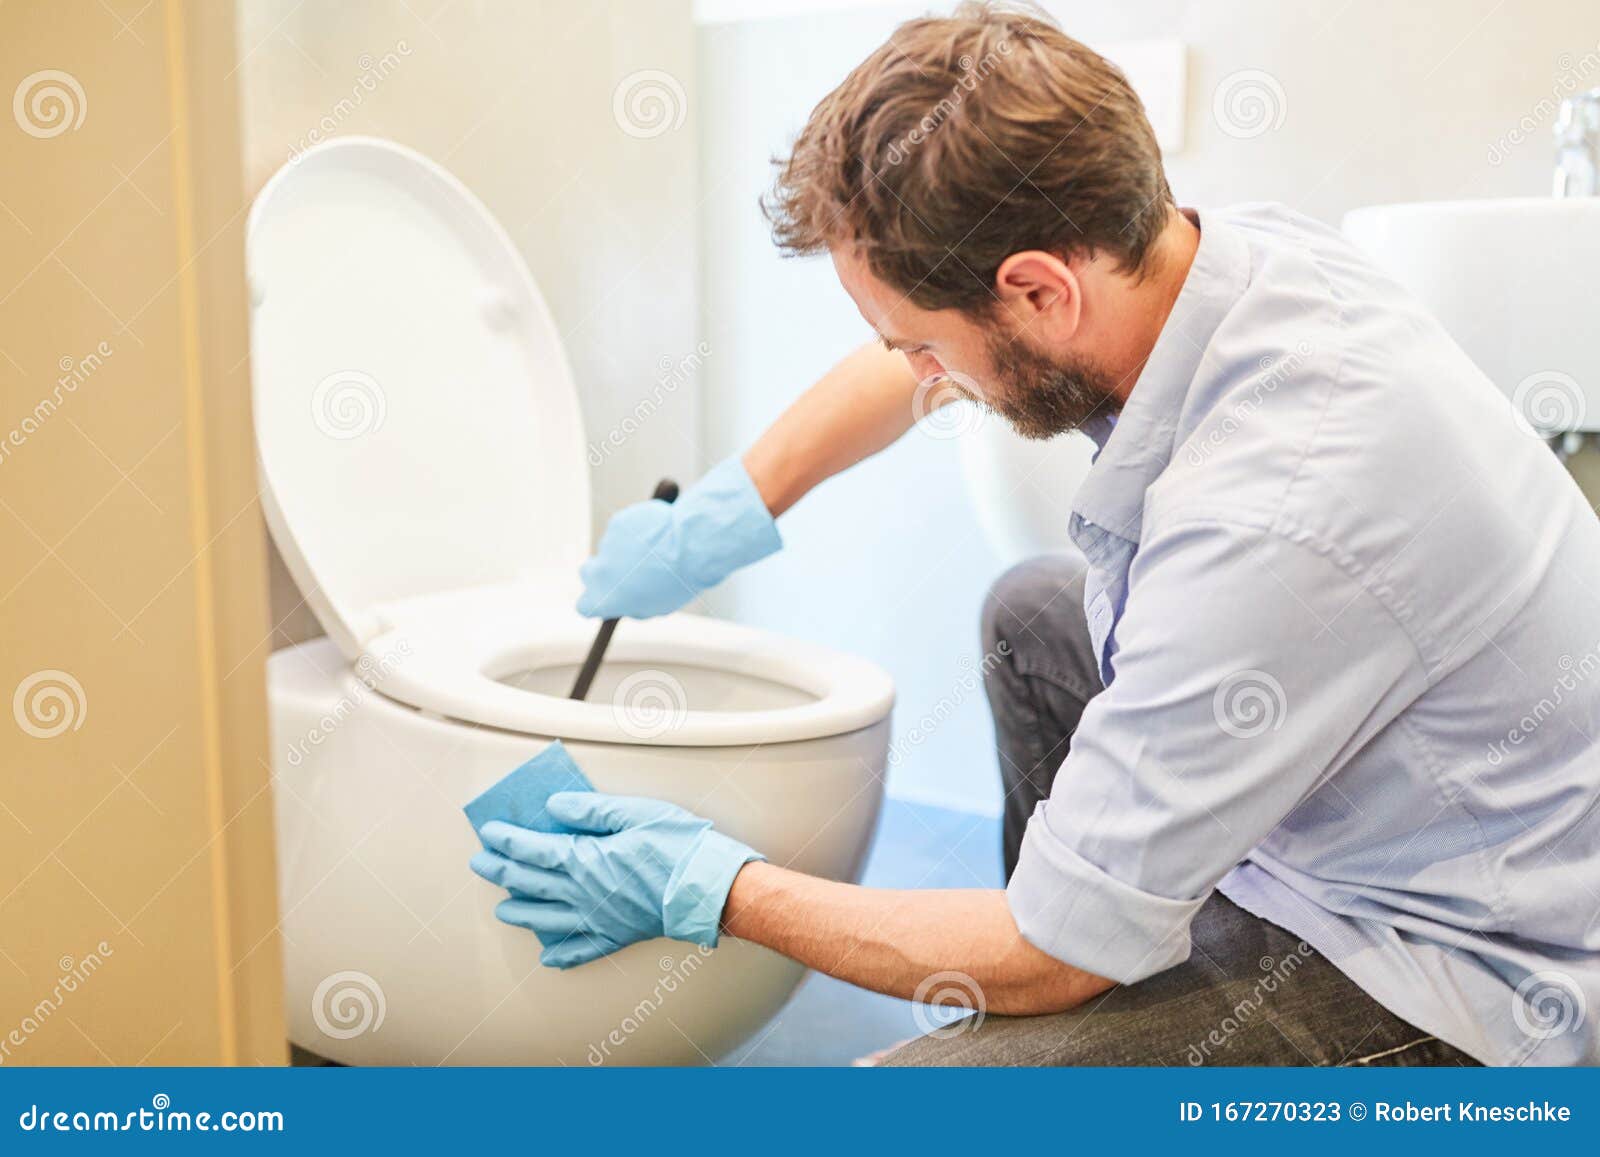 Houseman Cleaning the Toilet for Emancipation Stock Image - Image of  janitor, household: 167270323